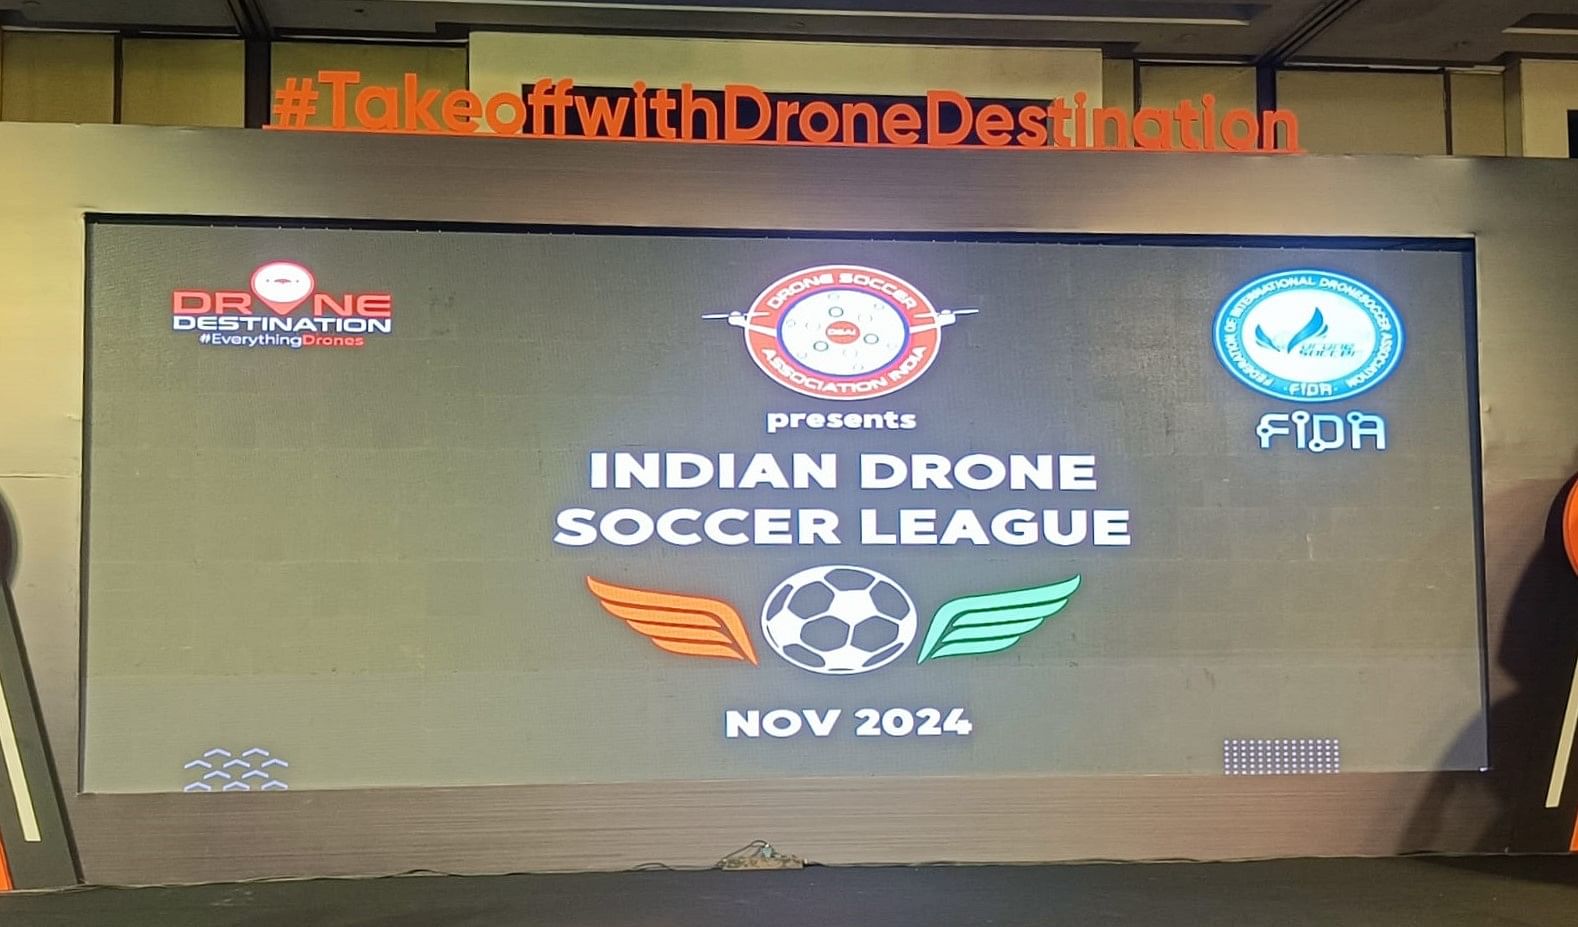 The first Drone Soccer World Cup Championship is scheduled to be held in Korea in 2025